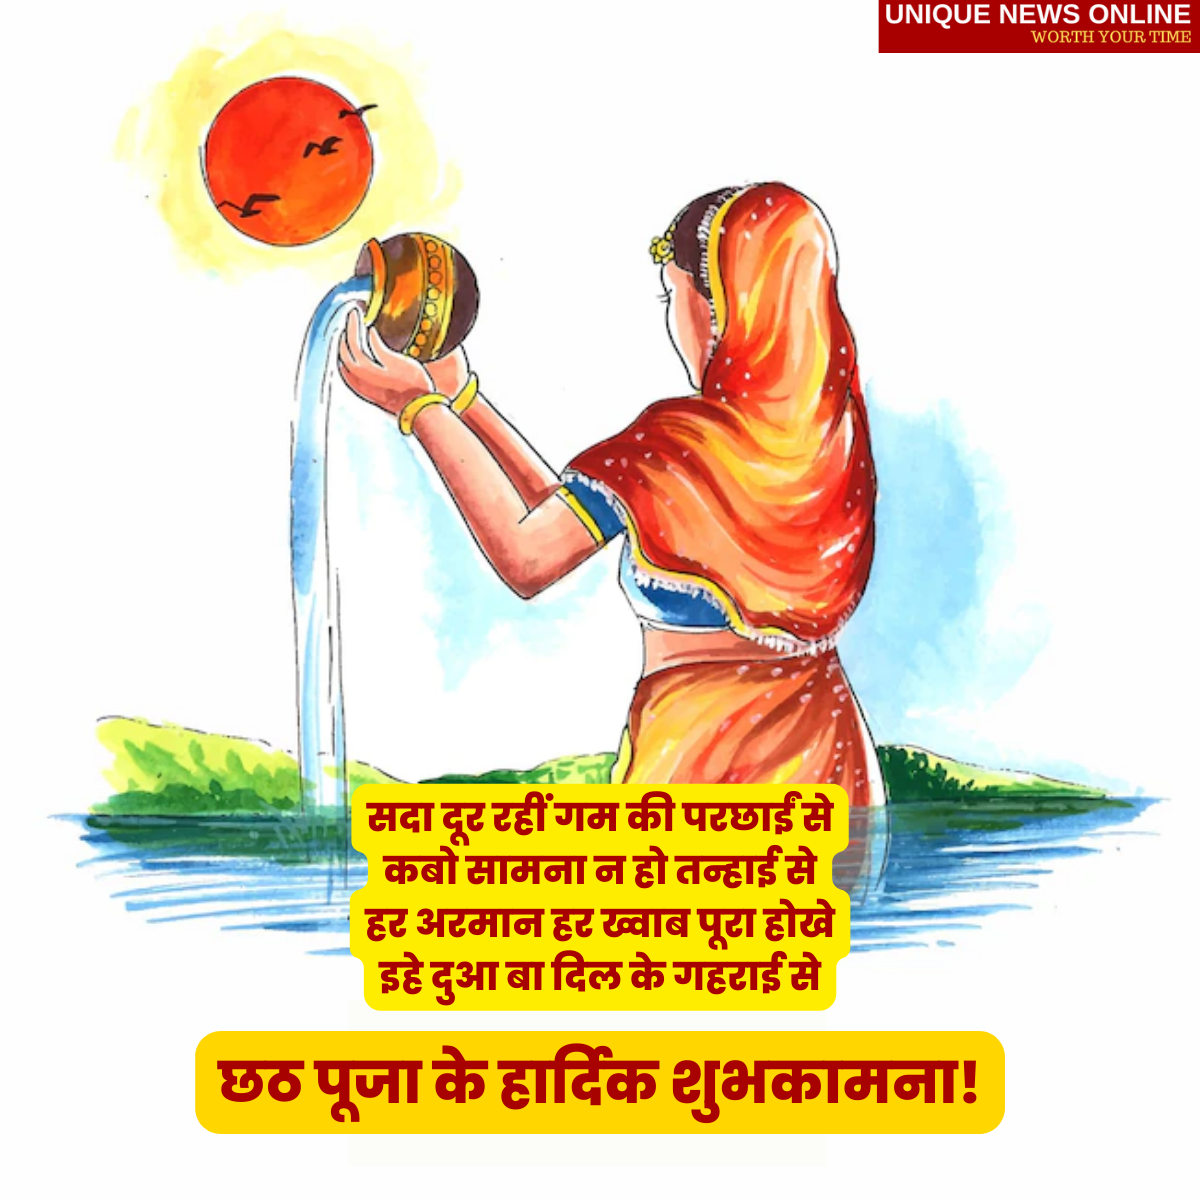 Chhath Puja 2022 Bhojpuri Greetings, Quotes, Wishes, Images, Messages, Posters and Greetings